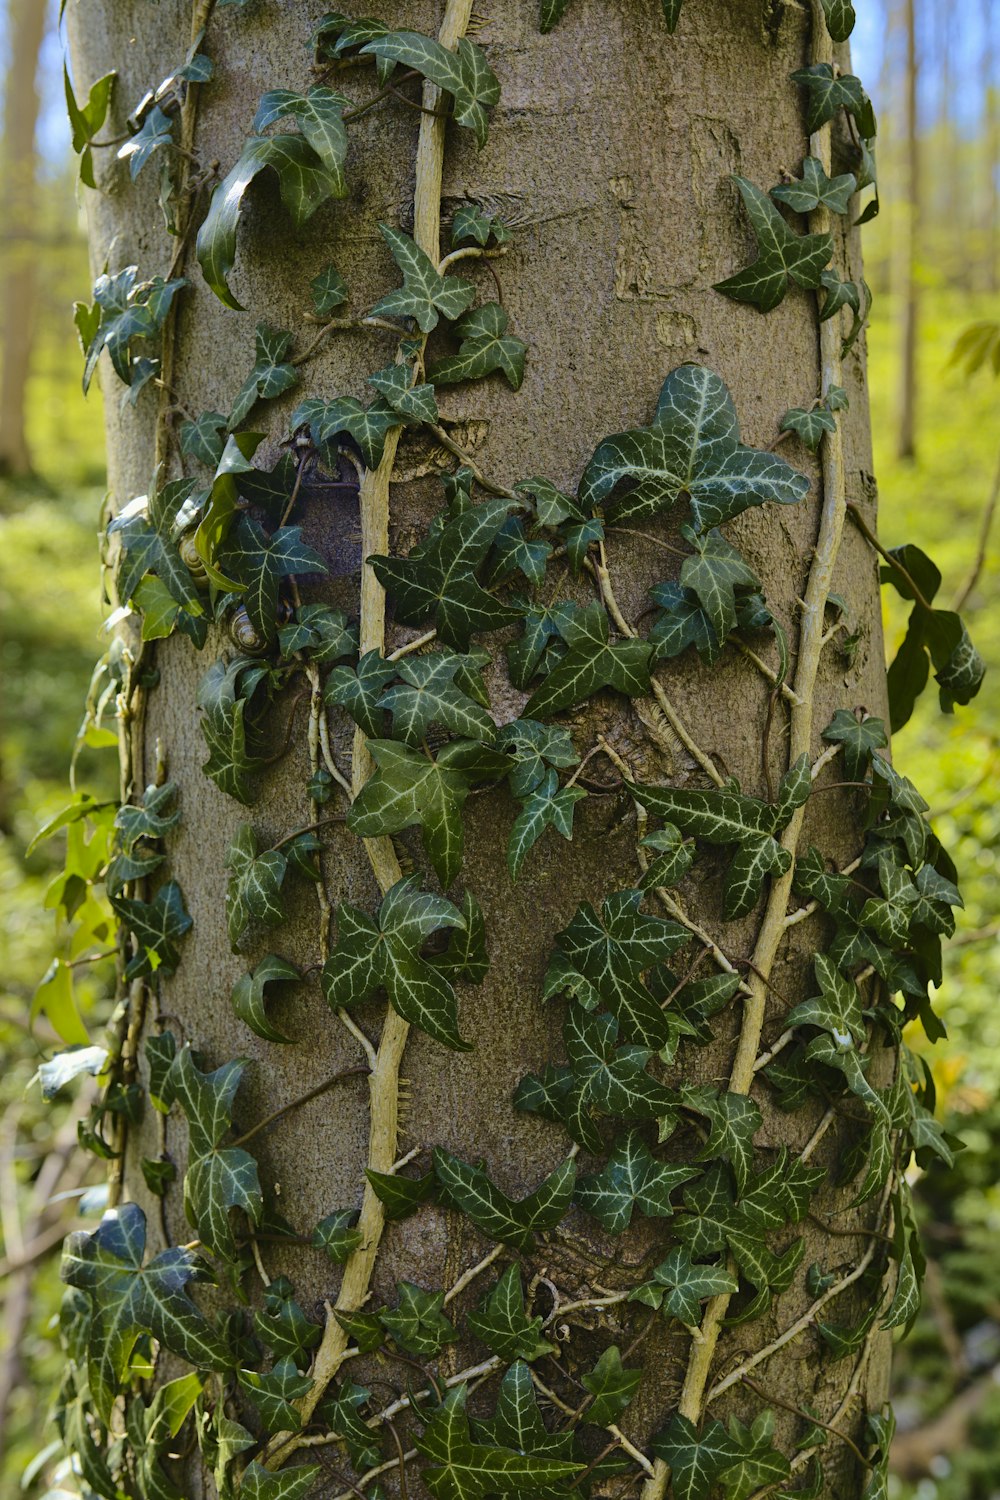 ivy growing on a tree trunk in a forest